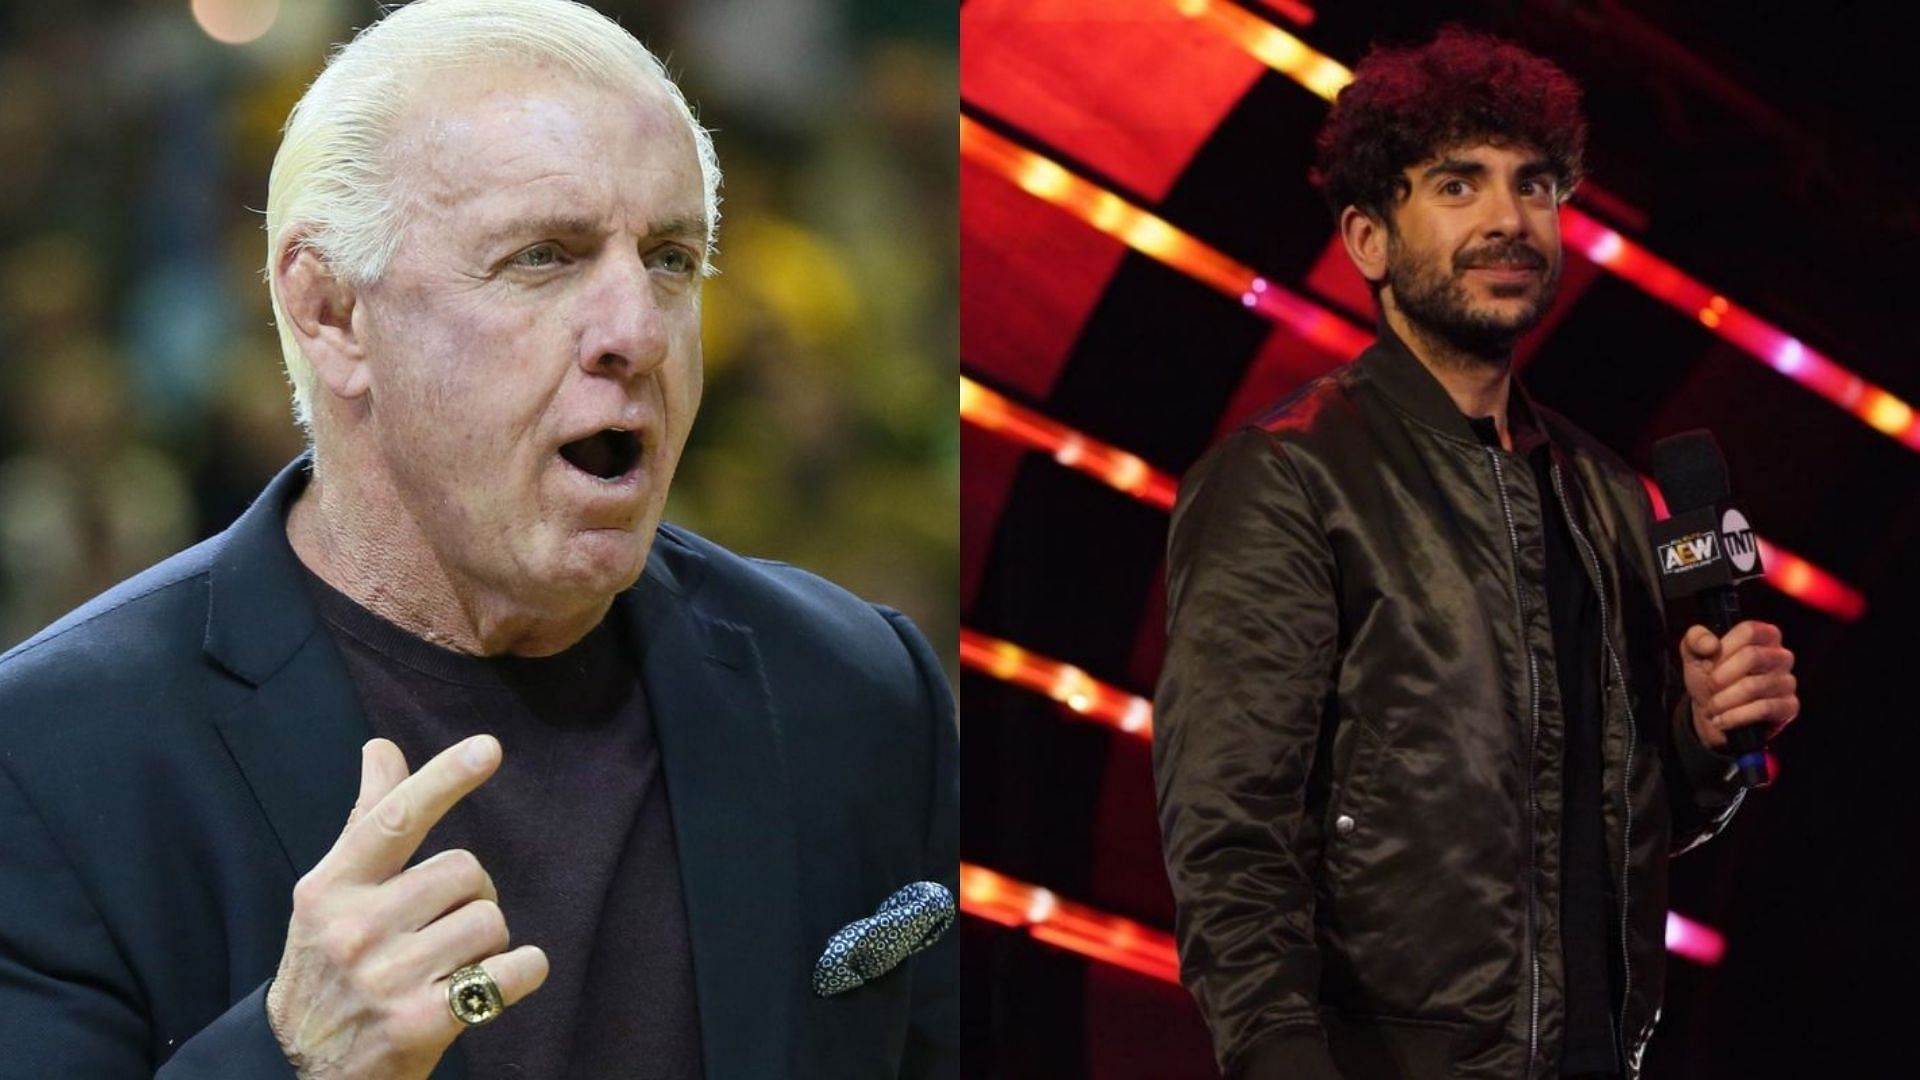 Ric Flair (left) and Tony Khan (right).